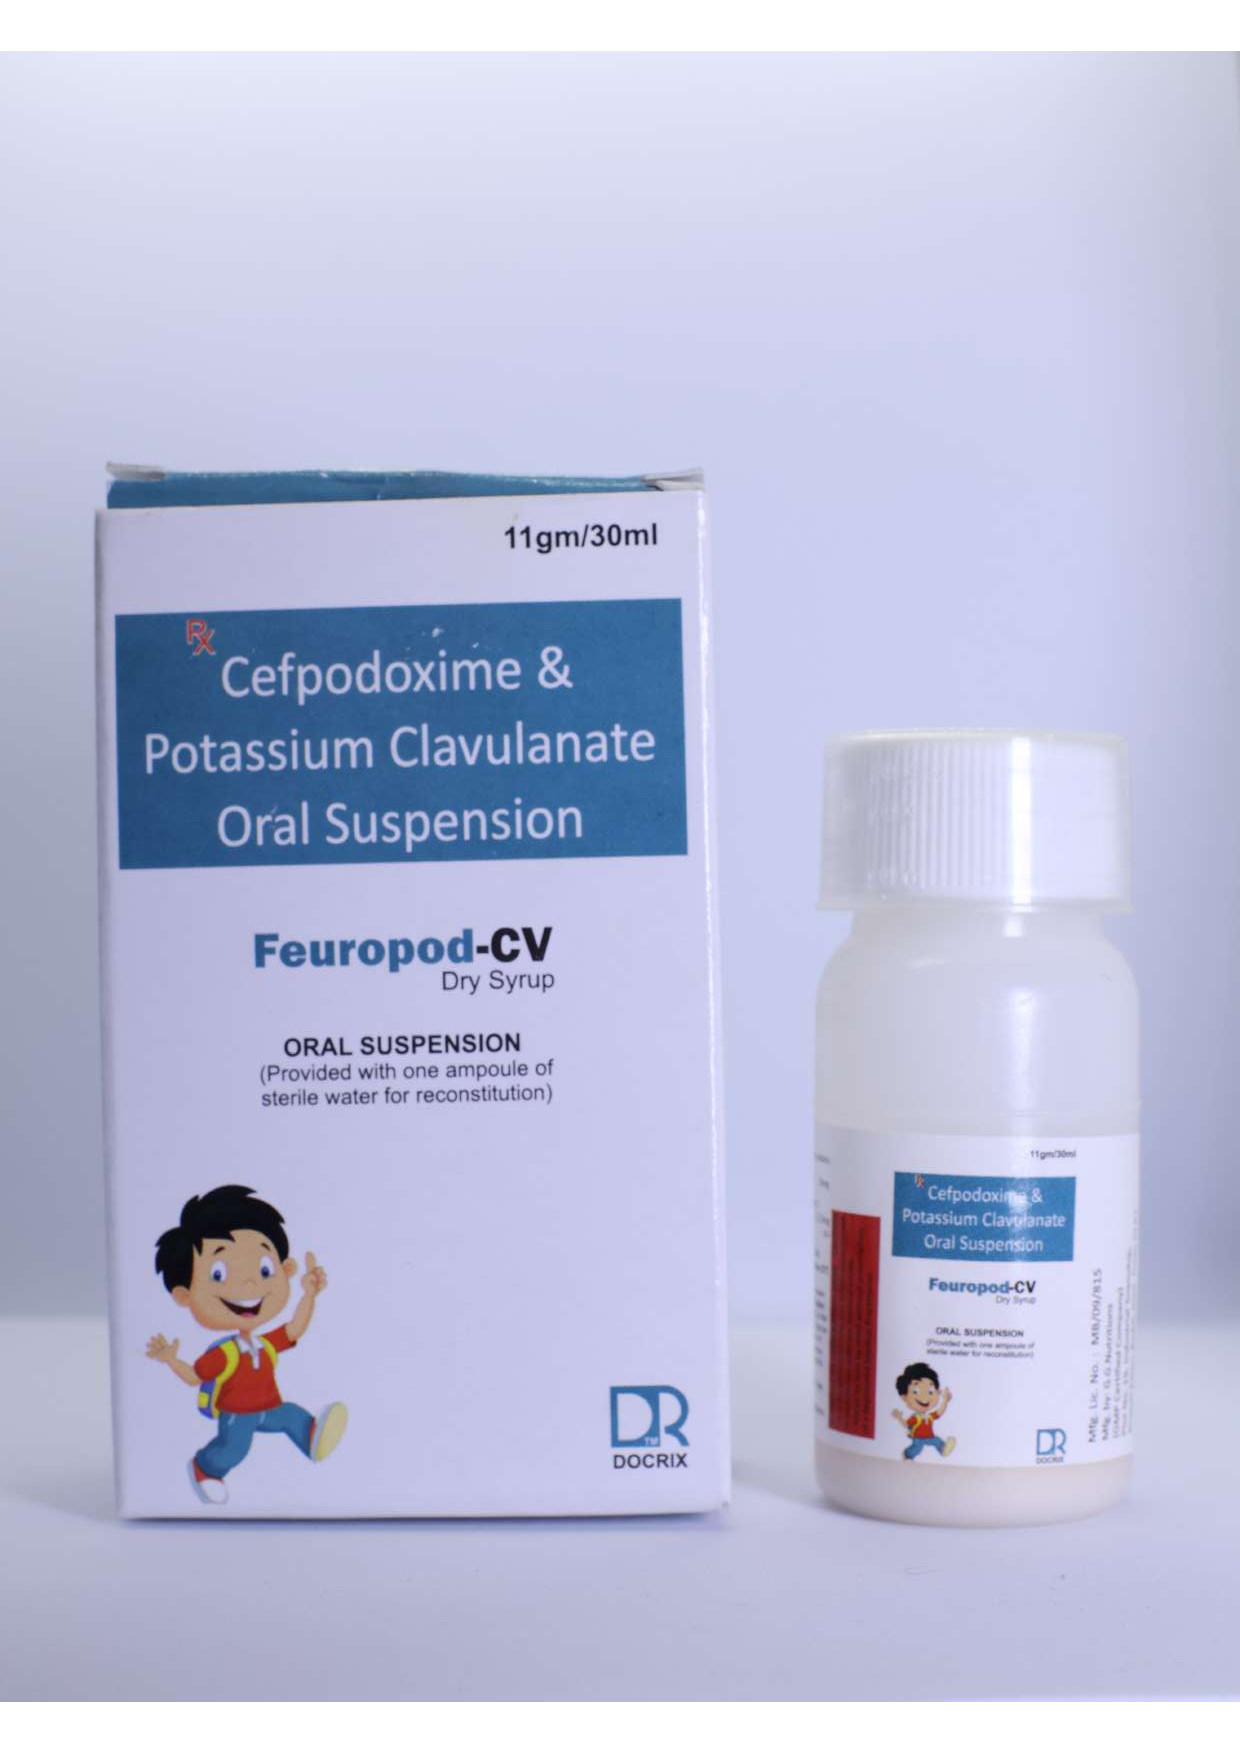 Product Name: Feuropod CV, Compositions of Feuropod CV are Cefpodoxime & Potassium Clavulanate Oral Suspension IP - Docrix Healthcare